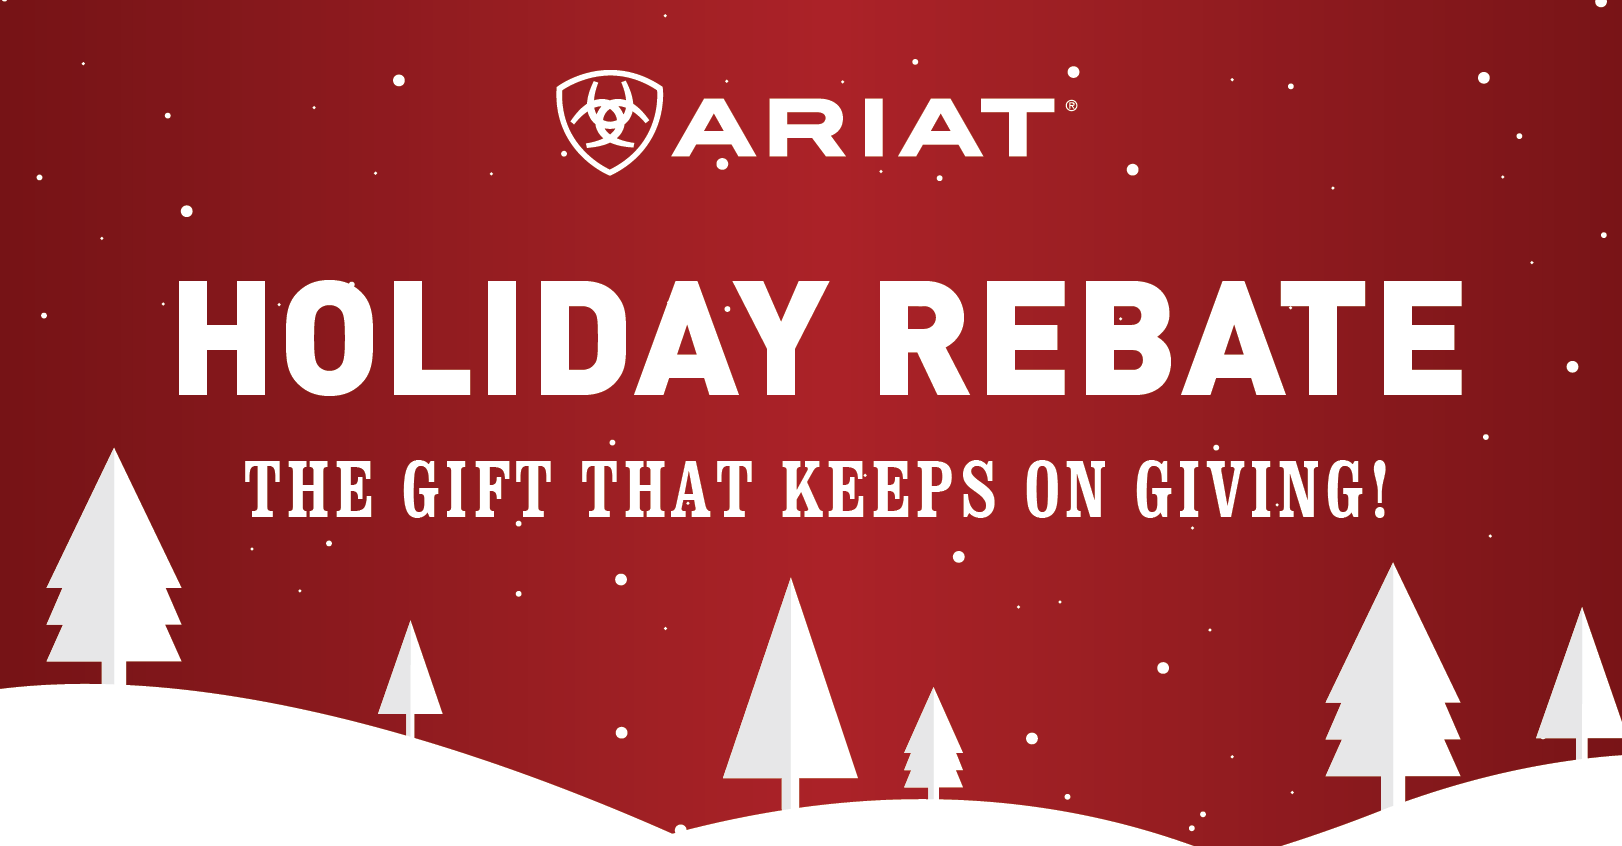 ariat-holiday-rebate-is-now-available-at-your-local-bomgaars-store